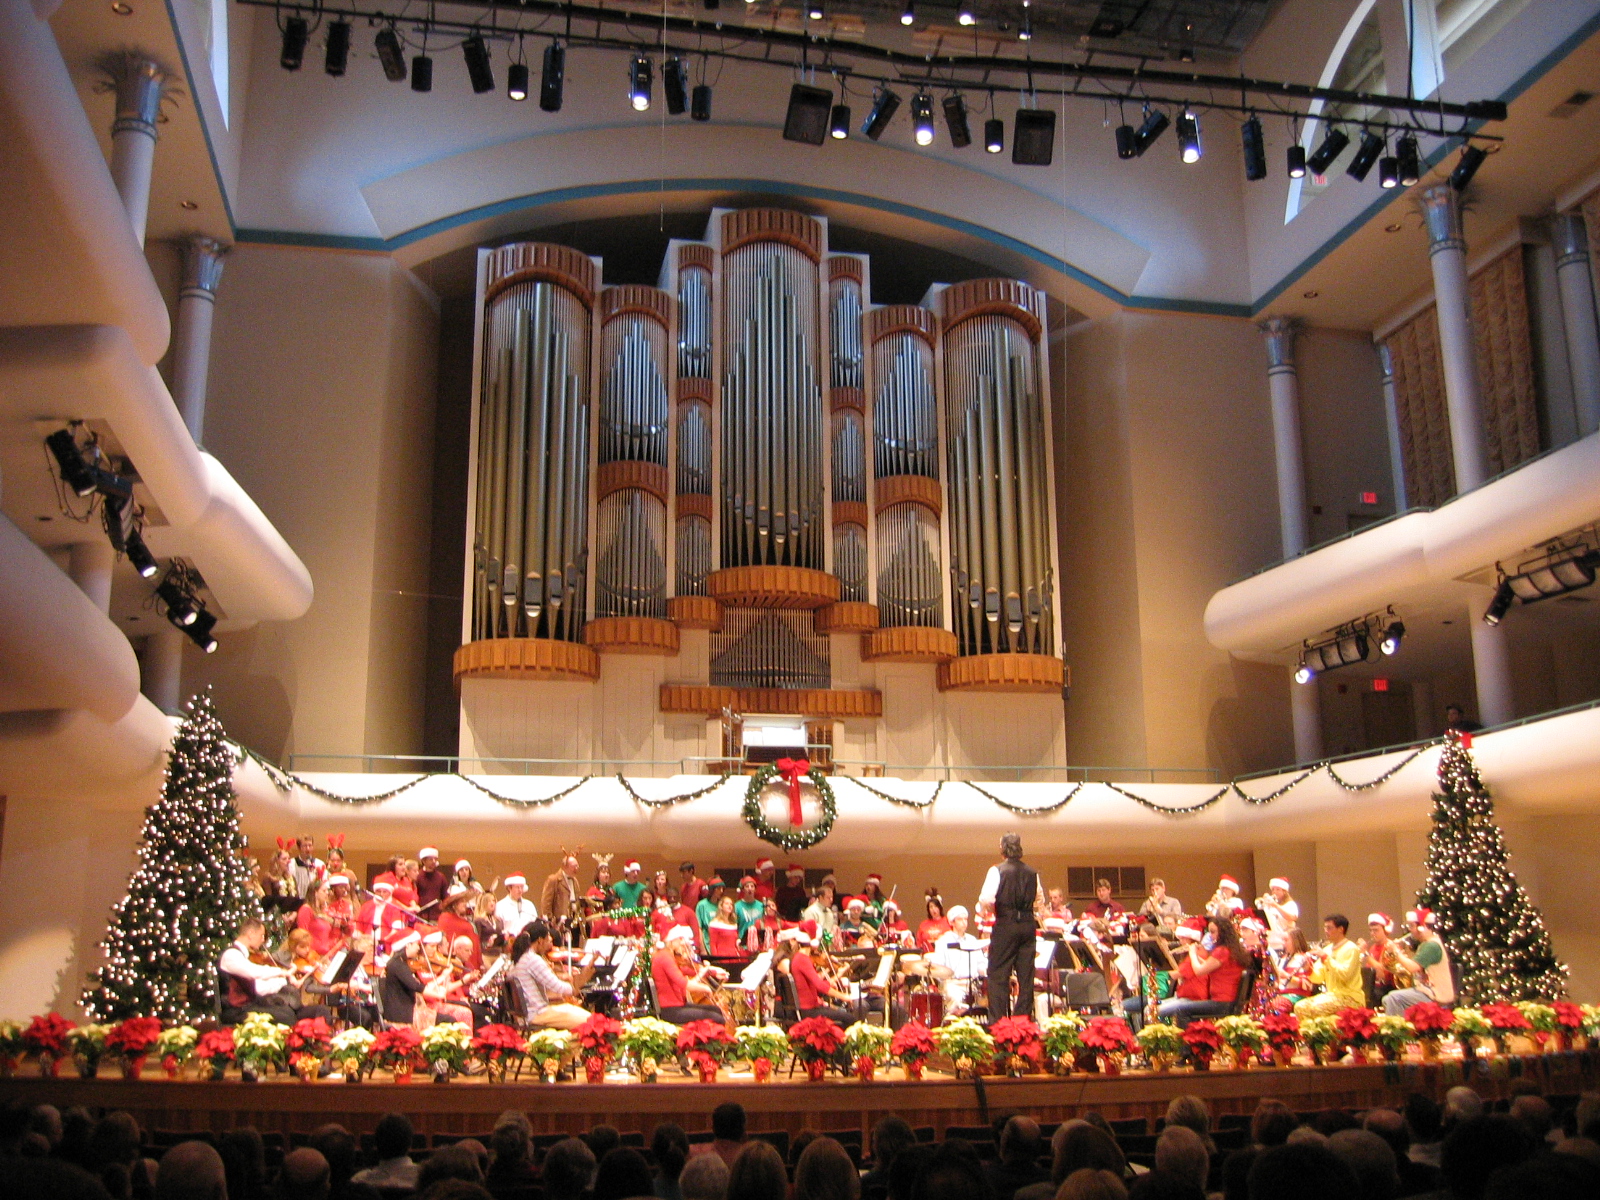 Concert hall decorated for the holidays